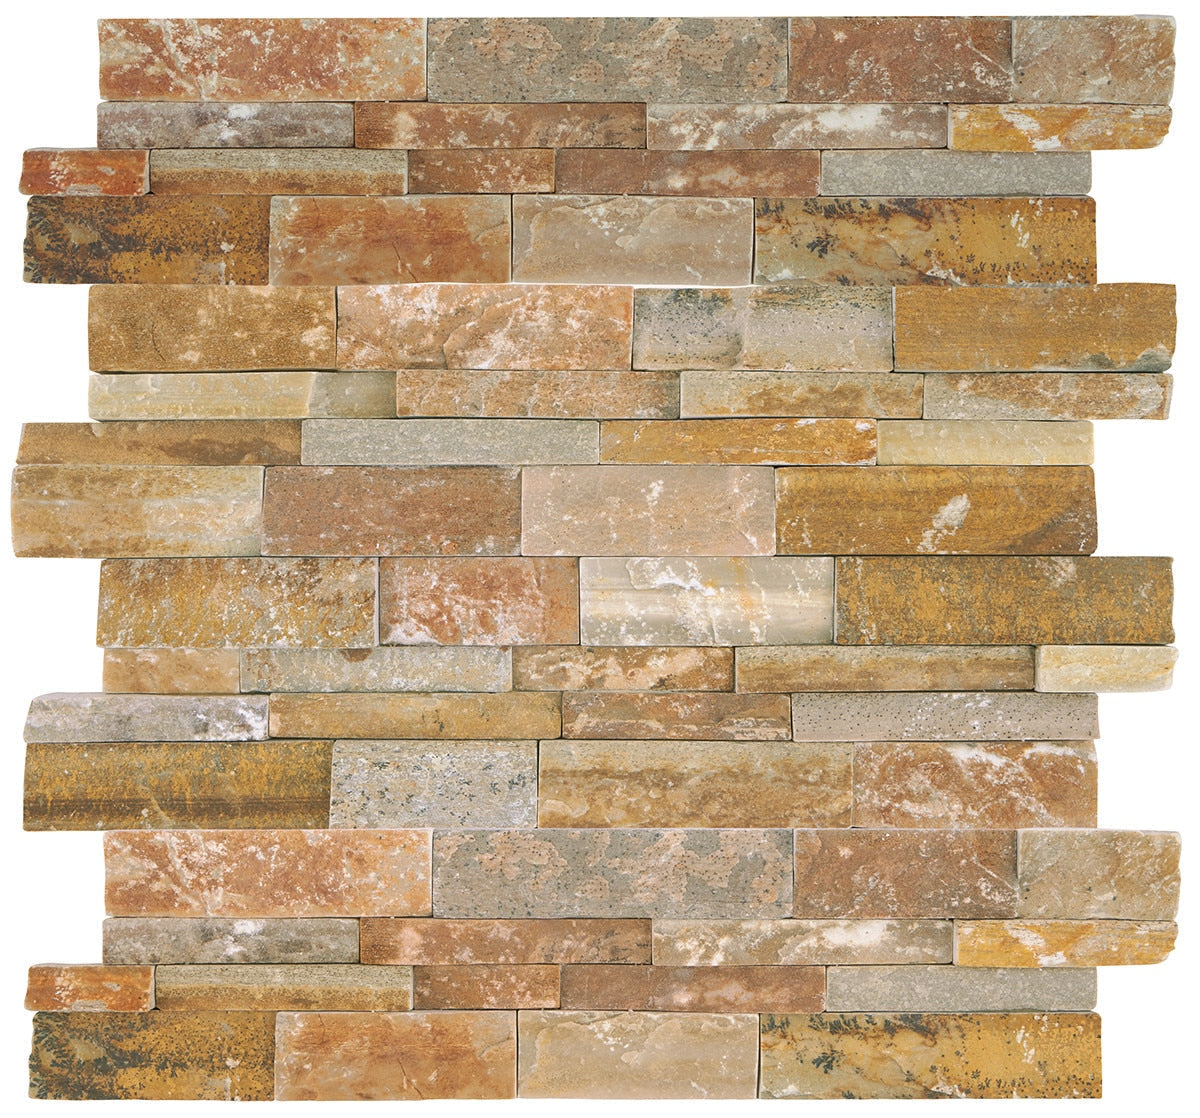 Daltile Stacked Stone 6" x 24" Natural Stone Tile